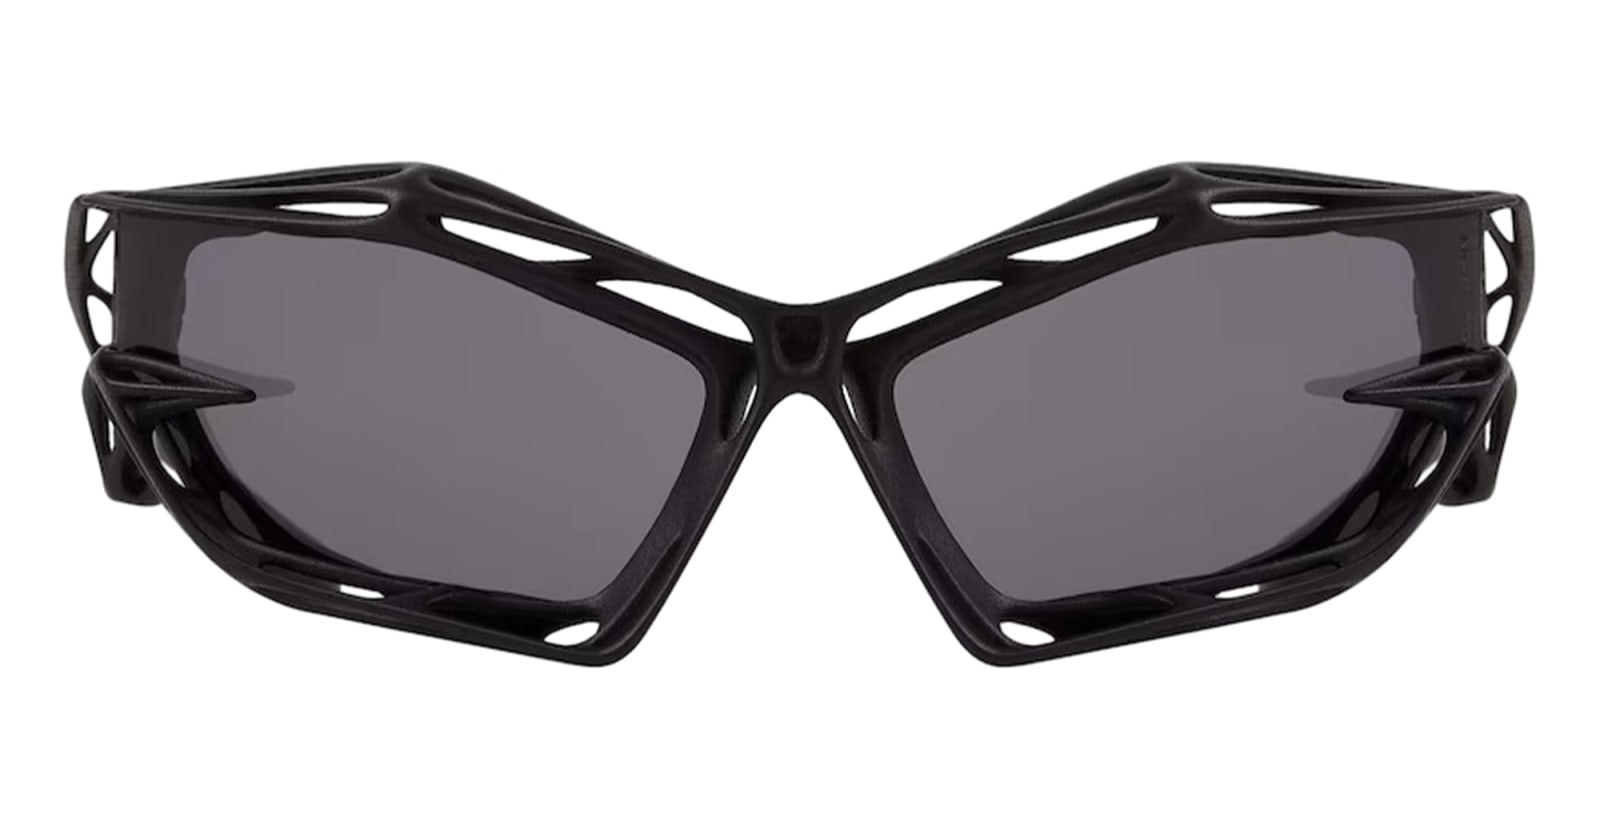 GIVENCHY GIV CUT CAGE - BLACK SUNGLASSES